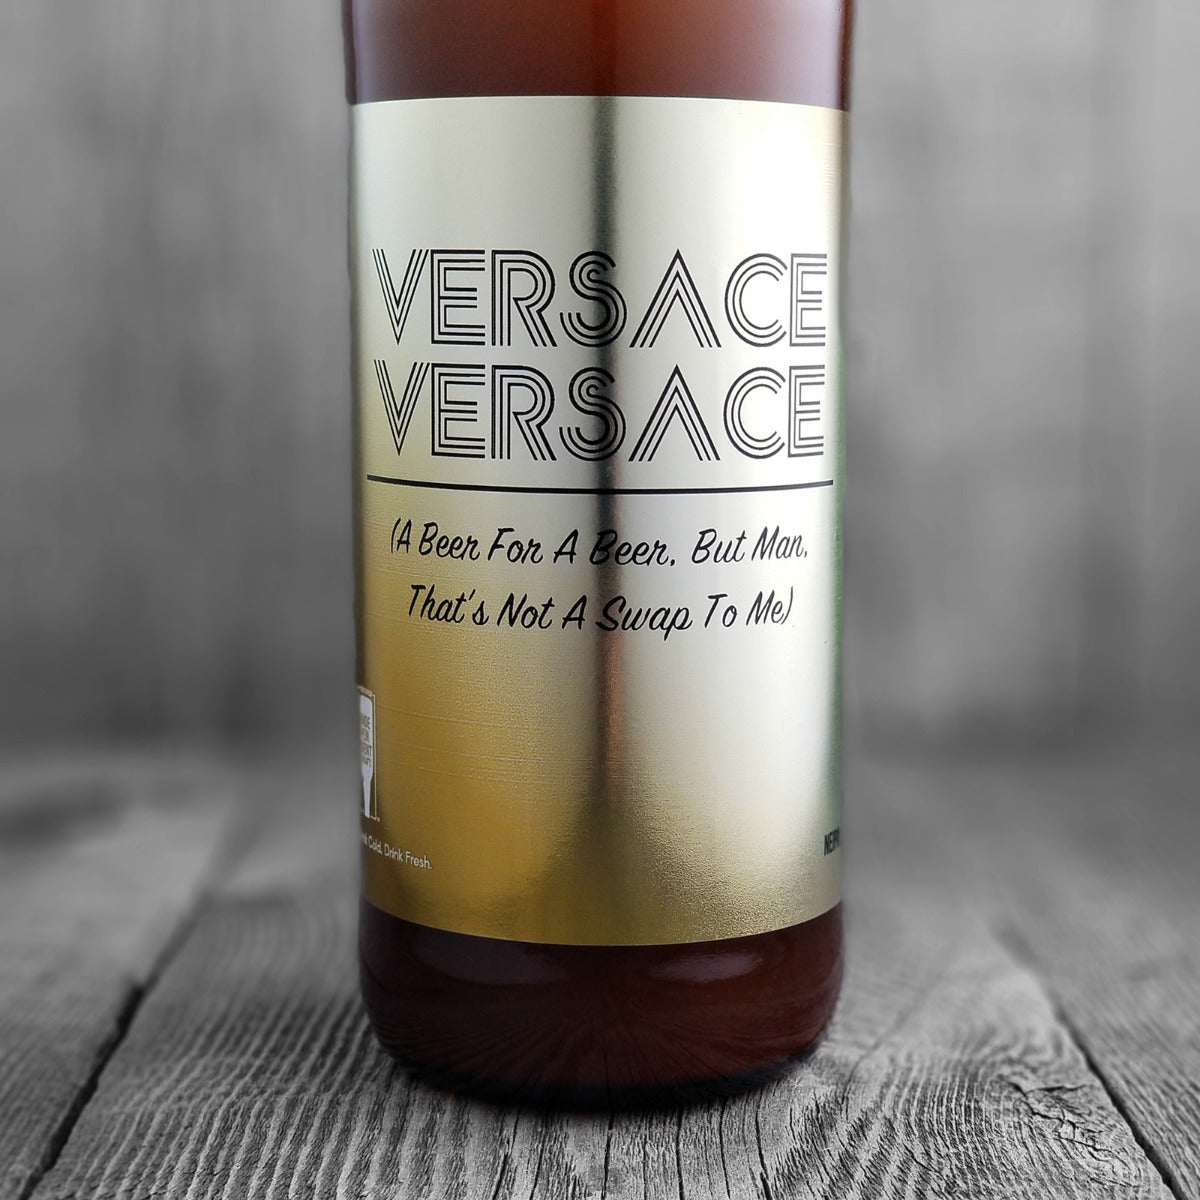 LCB Versace Versace (A Beer For A Beer. But Man, That's Not A Swap To Me)